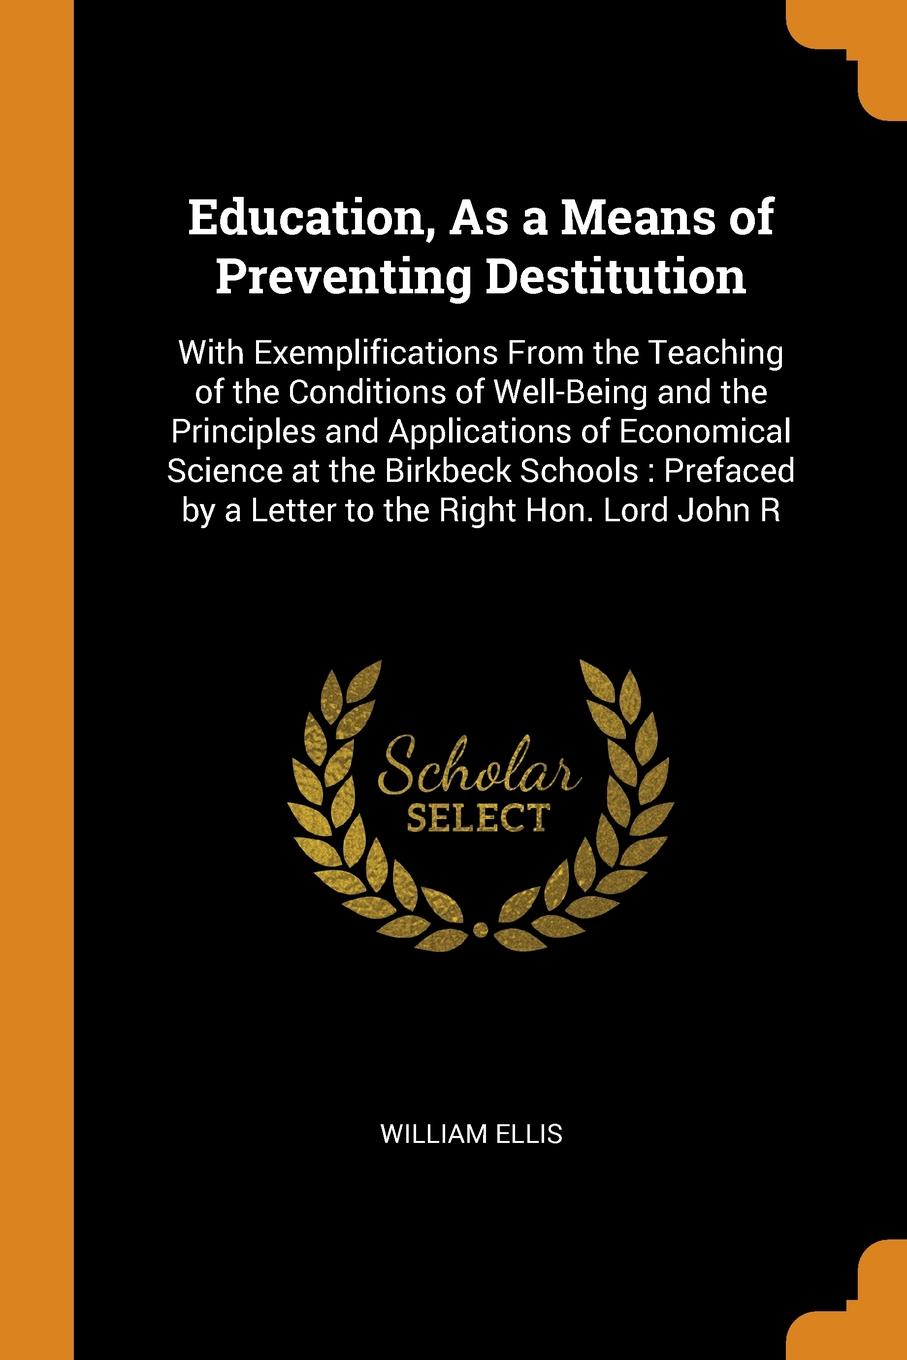 Education, As a Means of Preventing Destitution. With Exemplifications From the Teaching of the Conditions of Well-Being and the Principles and Applications of Economical Science at the Birkbeck Schools : Prefaced by a Letter to the Right Hon. Lor...